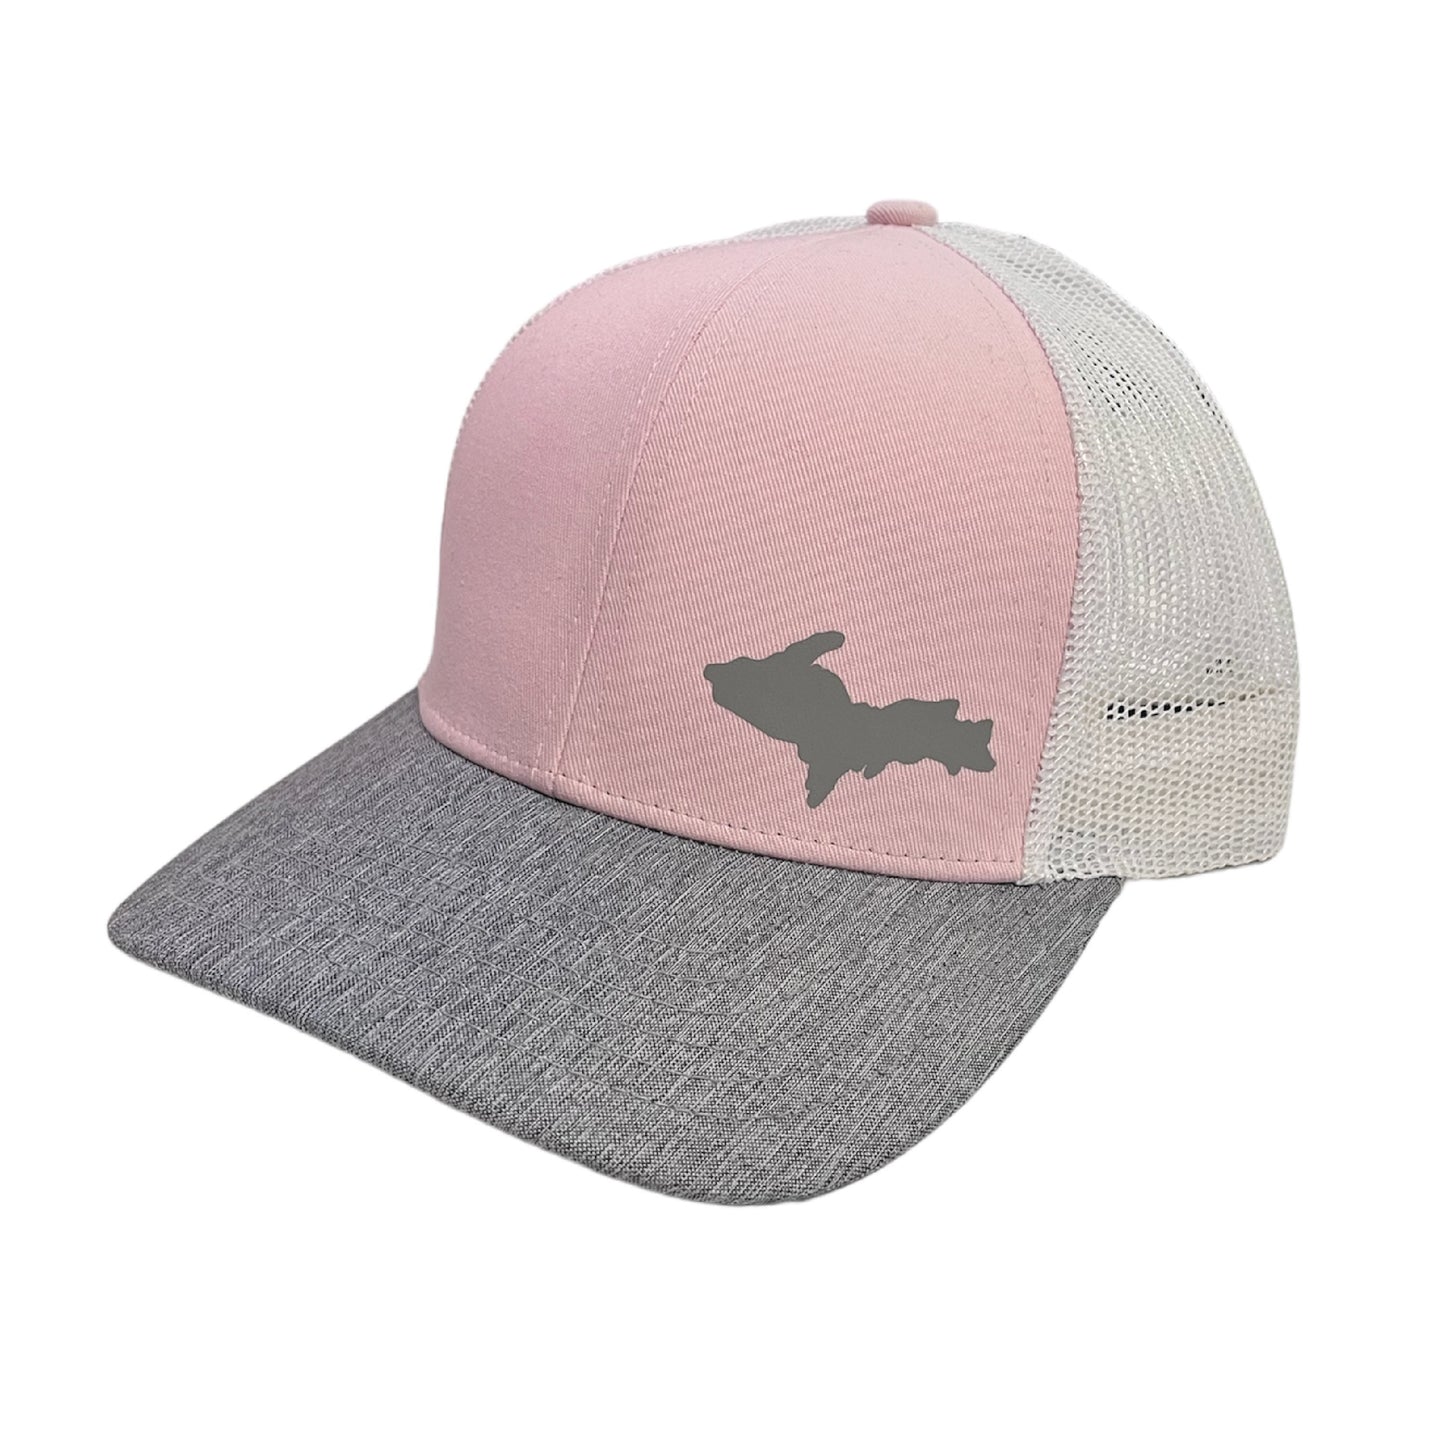 UP Hat